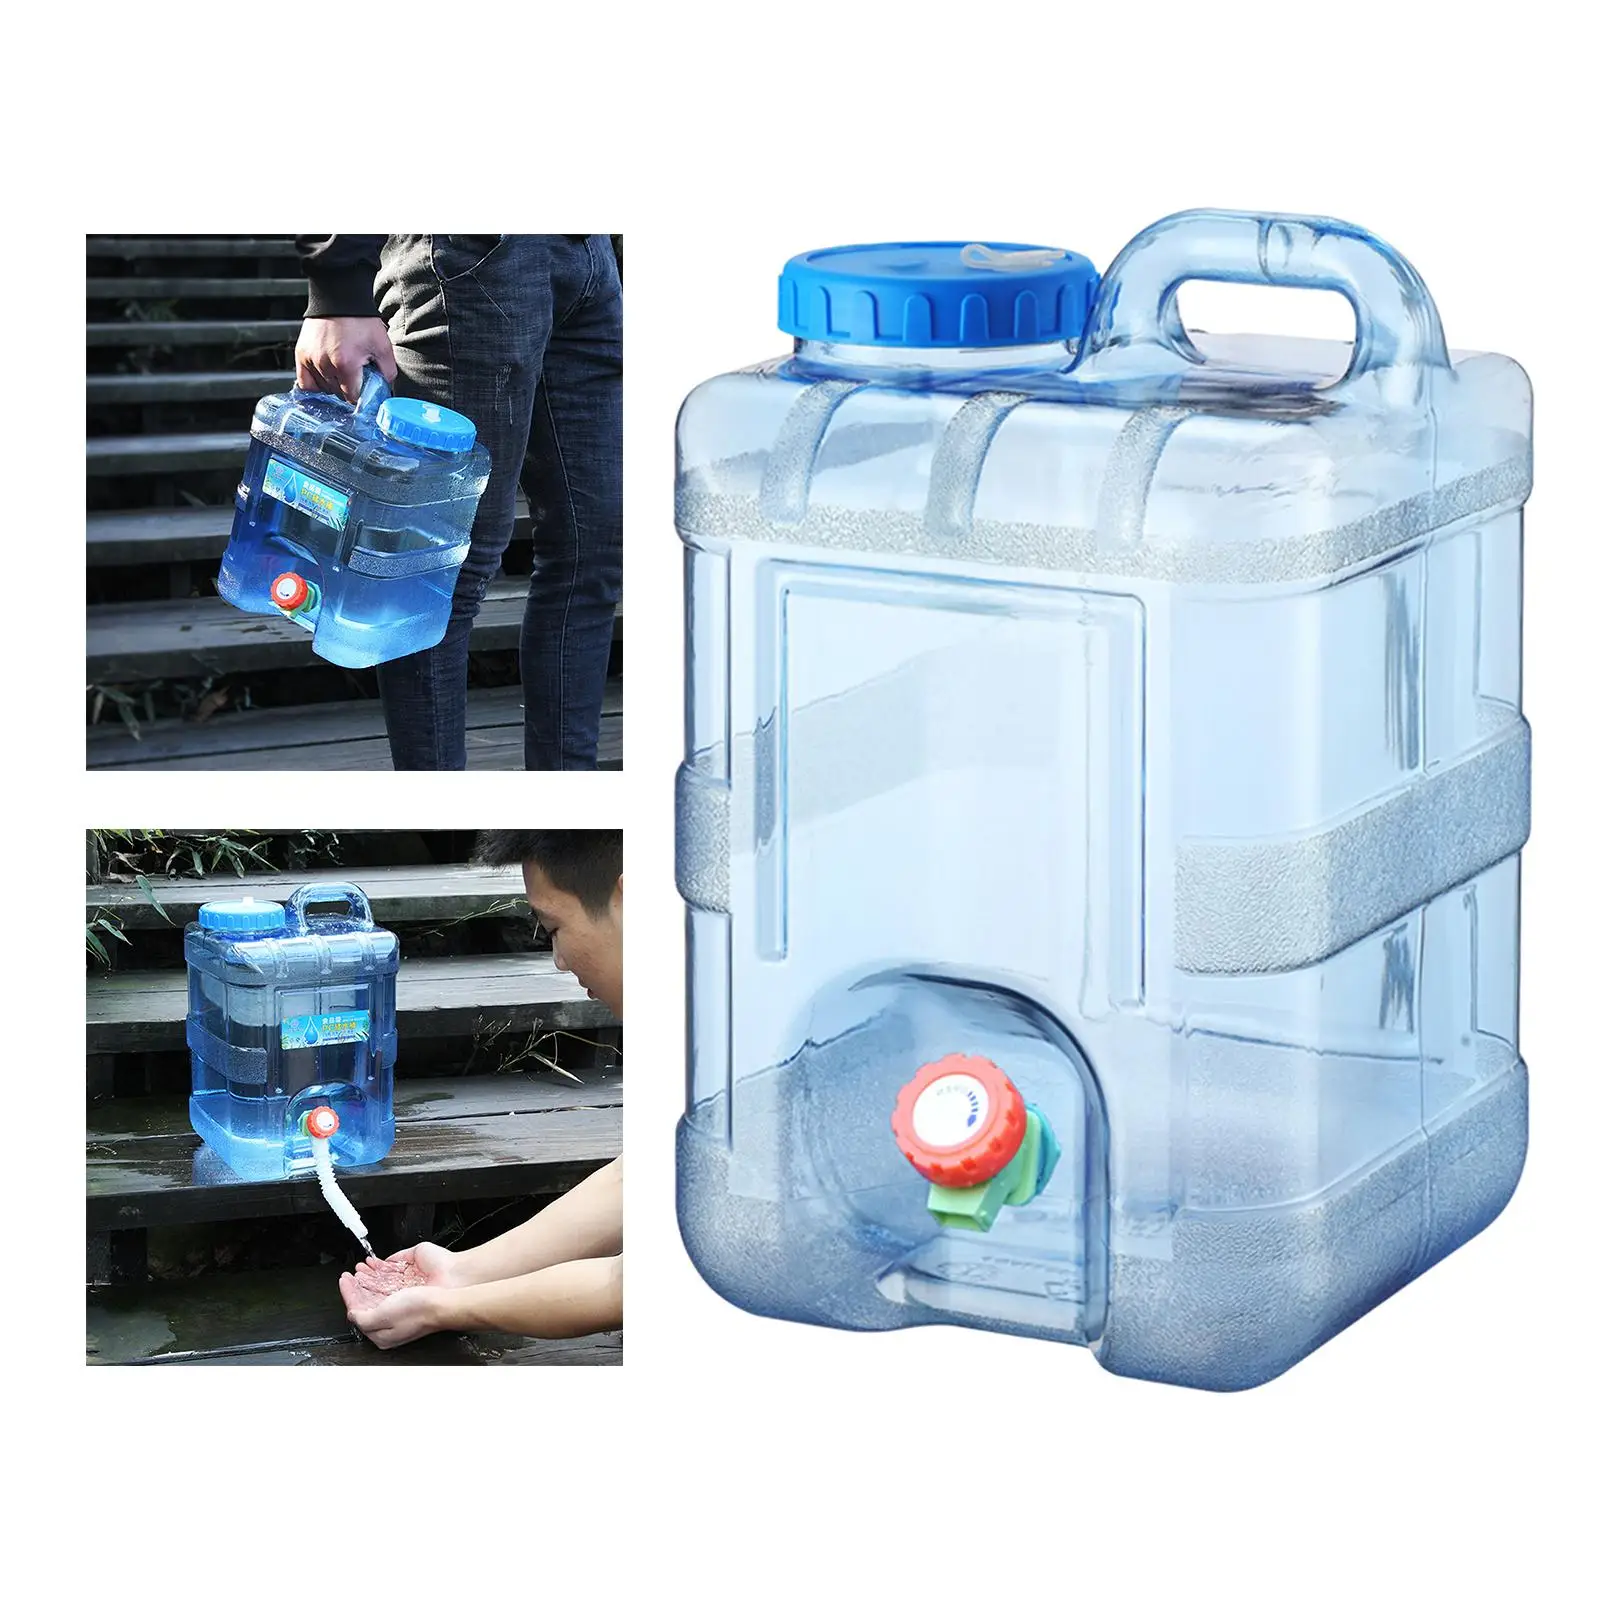 Portable Water Container with Spigot Water Canteen 10L Capacity for Cooking